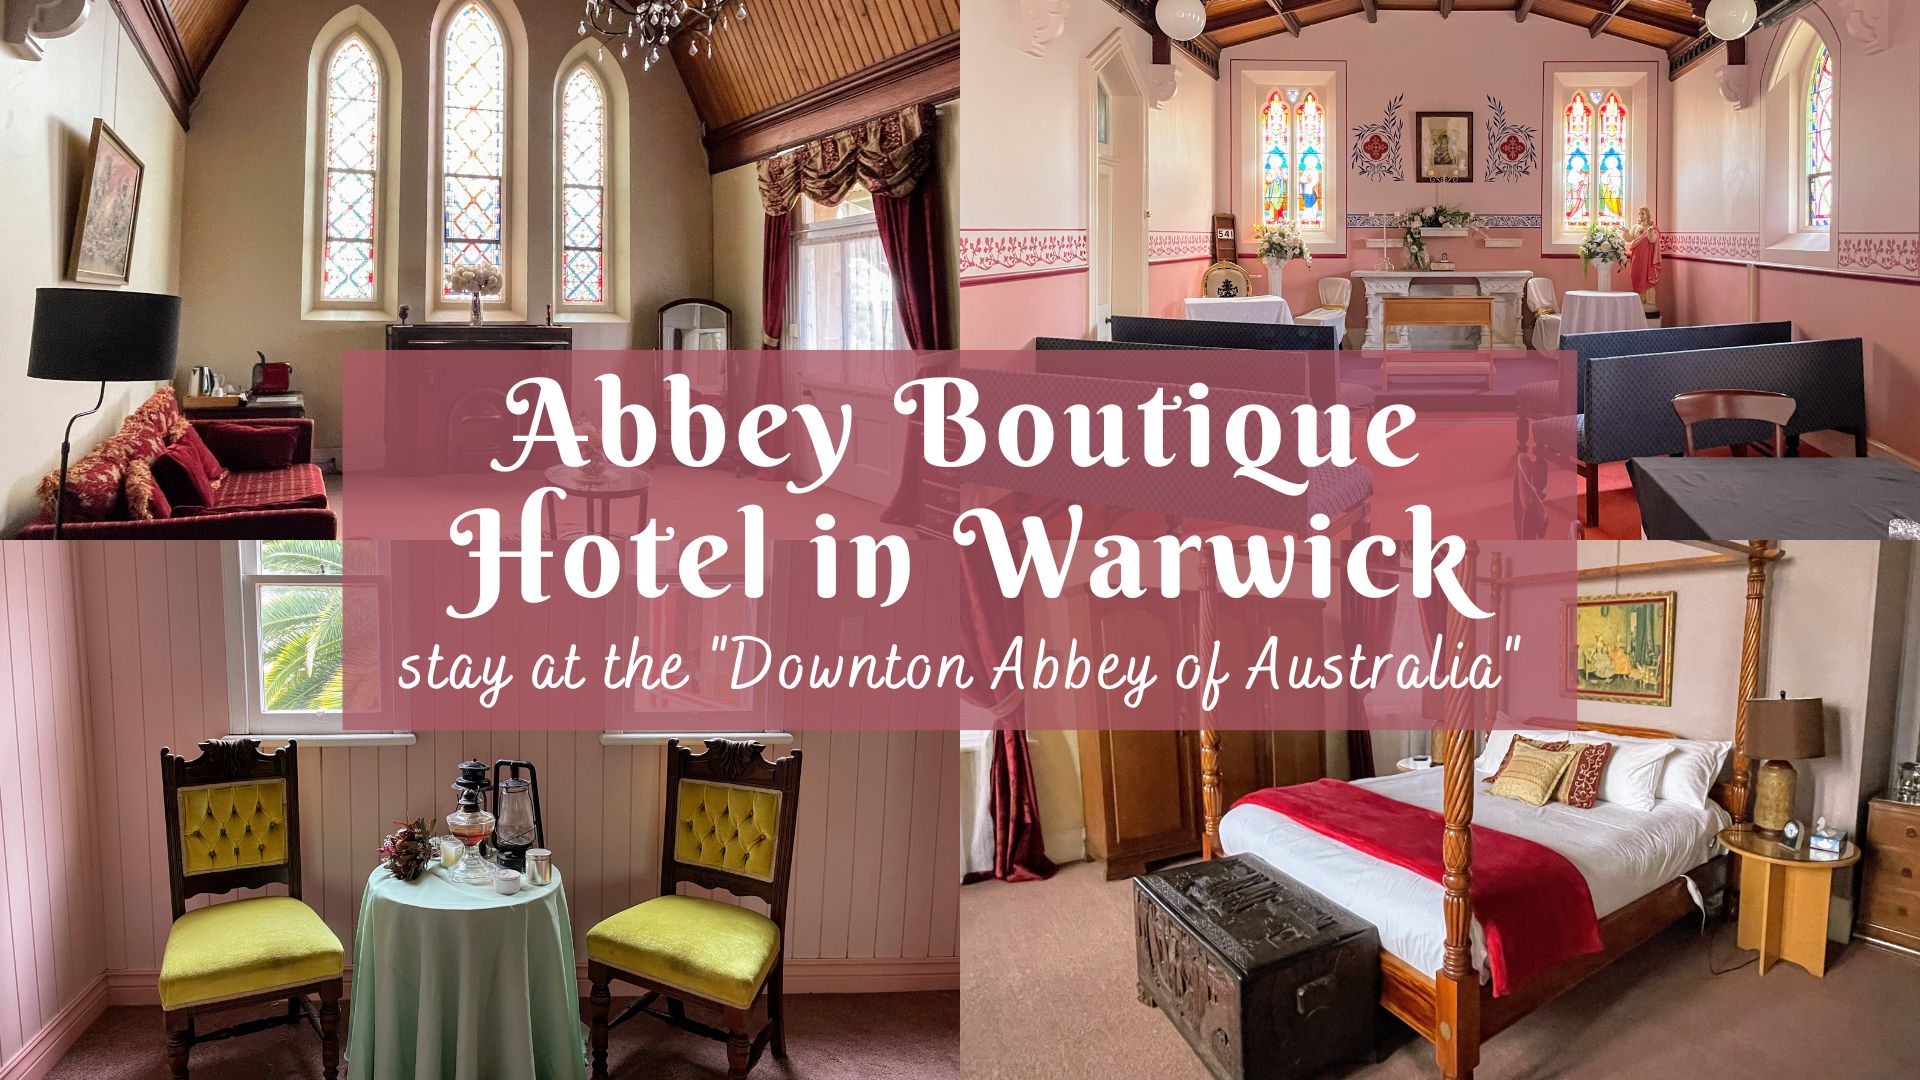 Abbey Boutique Hotel in Warwick, Australia, Australias Downton Abbey, unique accommodation in Australia, stay in a castle and converted convent in Warwick Queensland, chapel stained glass